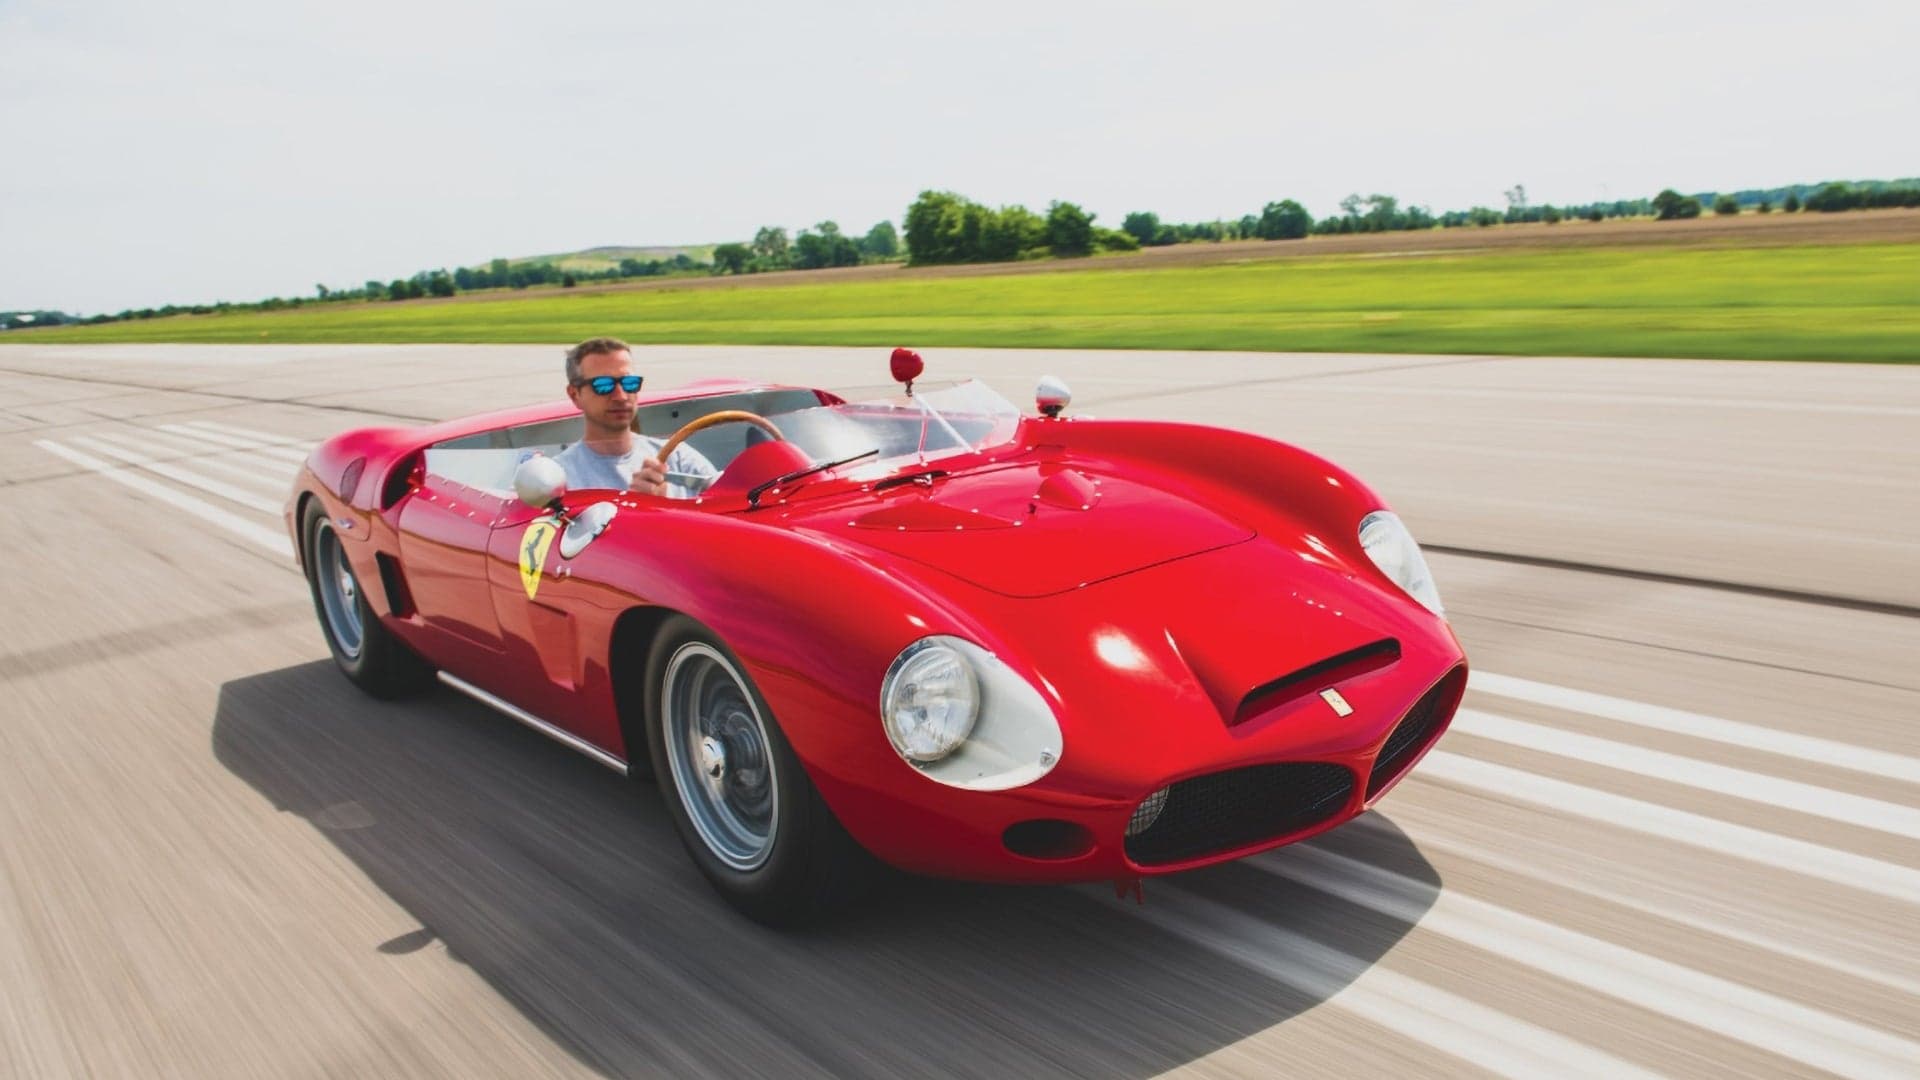 One-of-Five 1962 Ferrari 196 SP Race Car Expected to Sell for $8M-$10M at Monterey